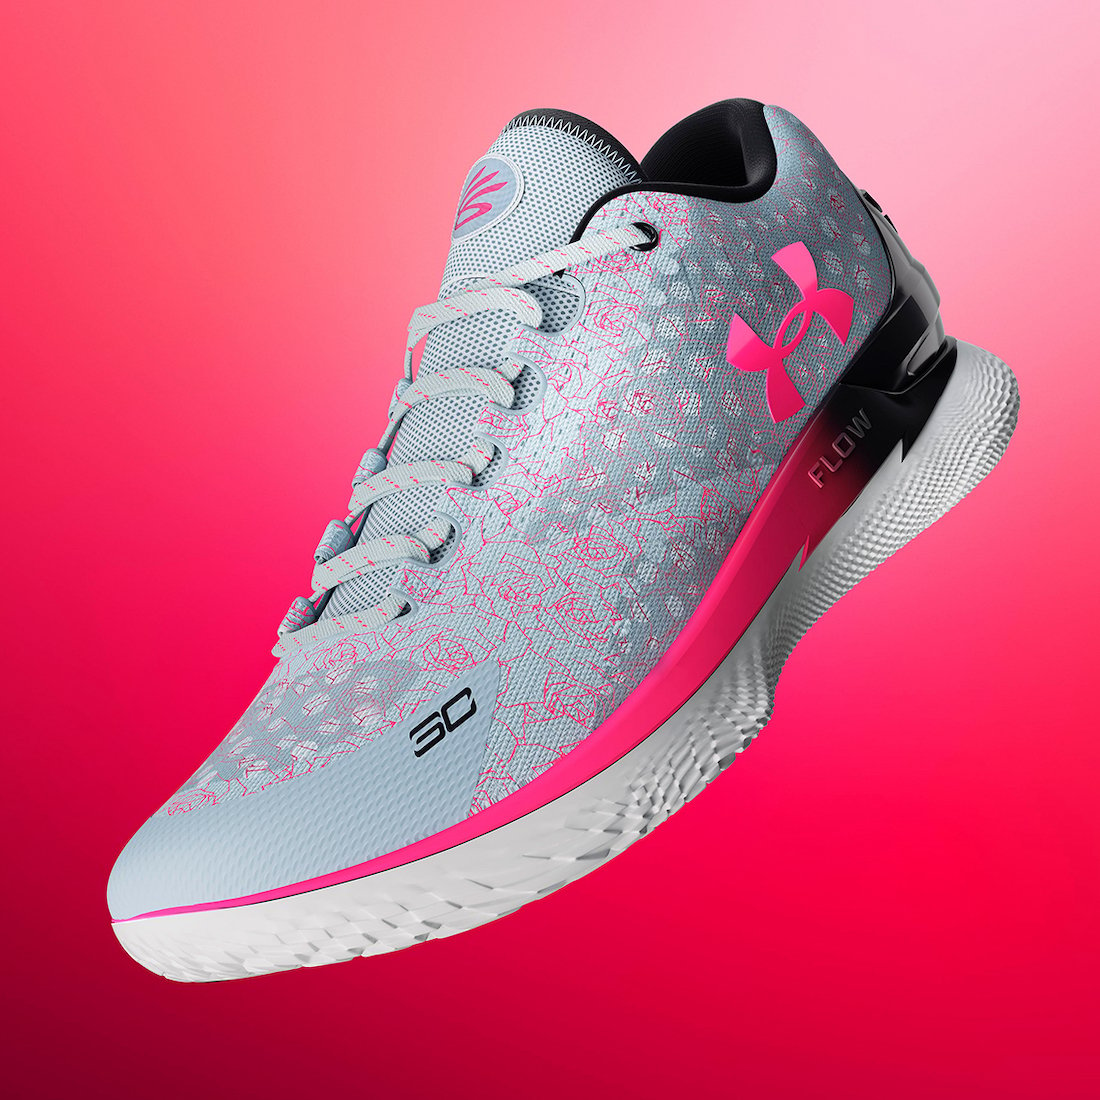 Under Armour Curry 1 Low FloTro Mothers Day 3026278-401